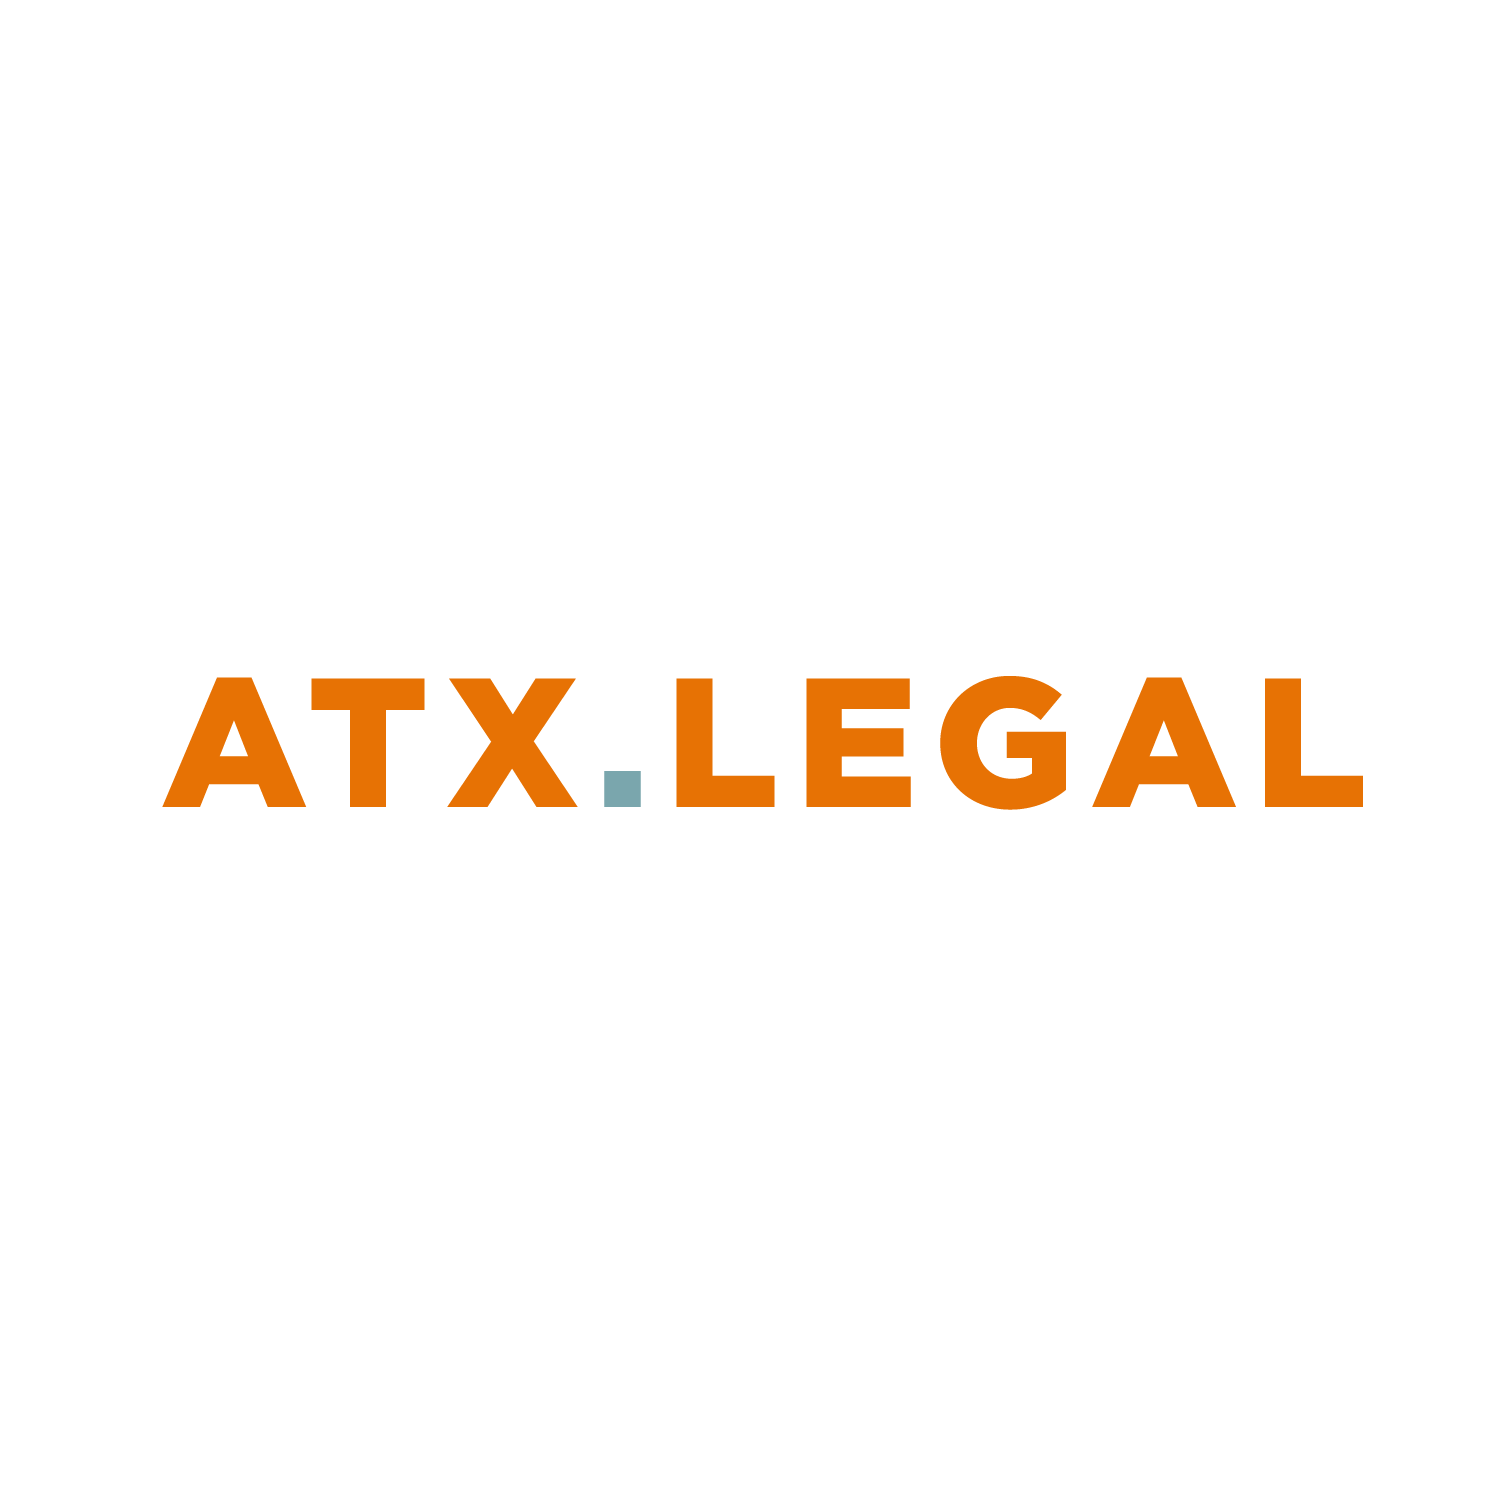 ATX Legal handles criminal defense and DWI cases in Travis, Williamson and Hays Counties.